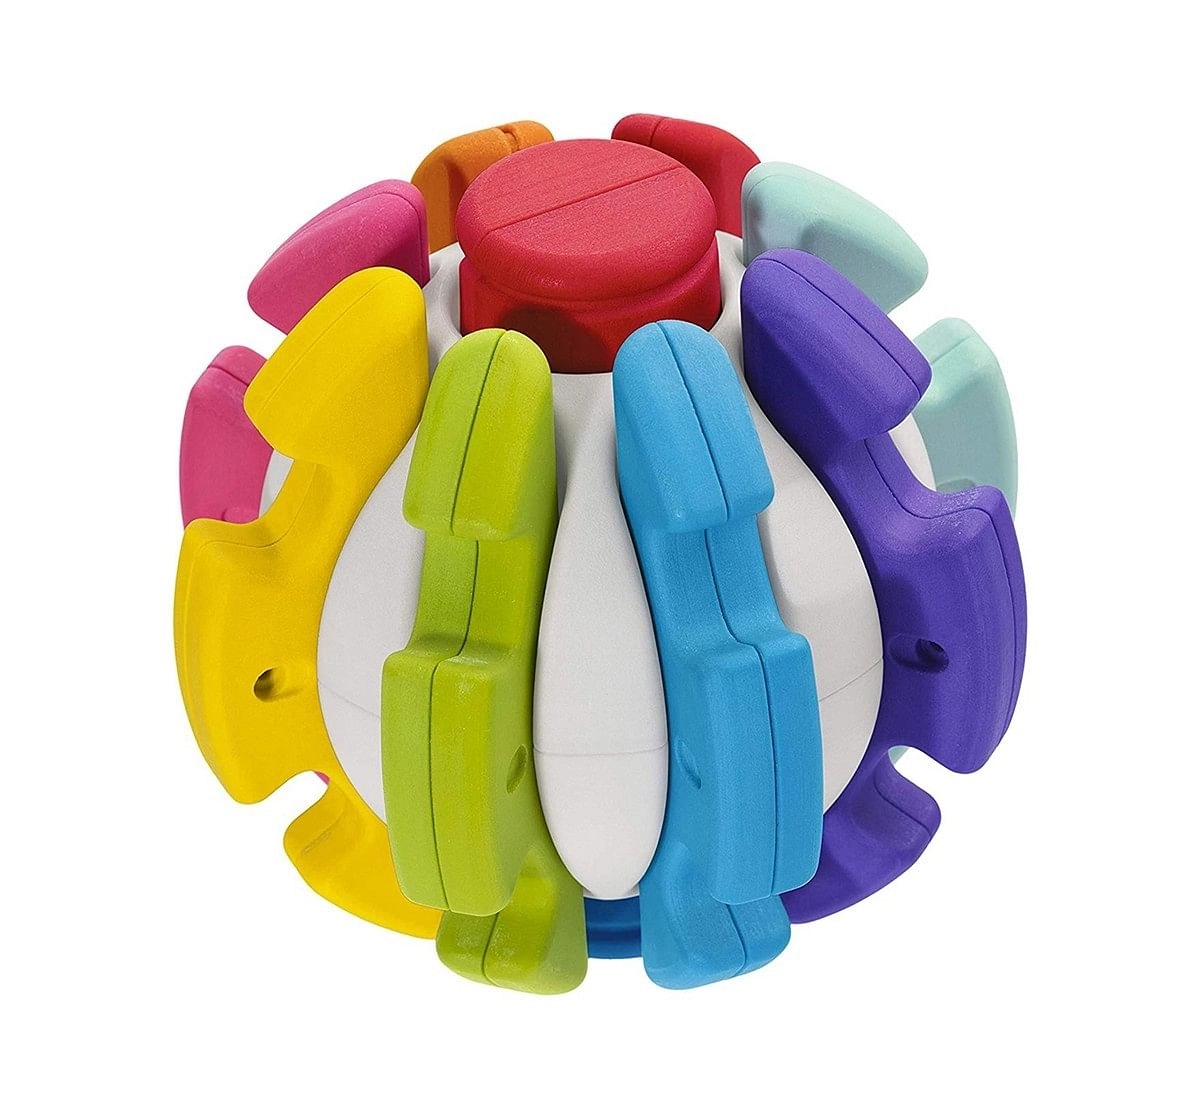 Chicco 2 In 1 Transform A Ball Activity Toy for Kids age 12M+ 